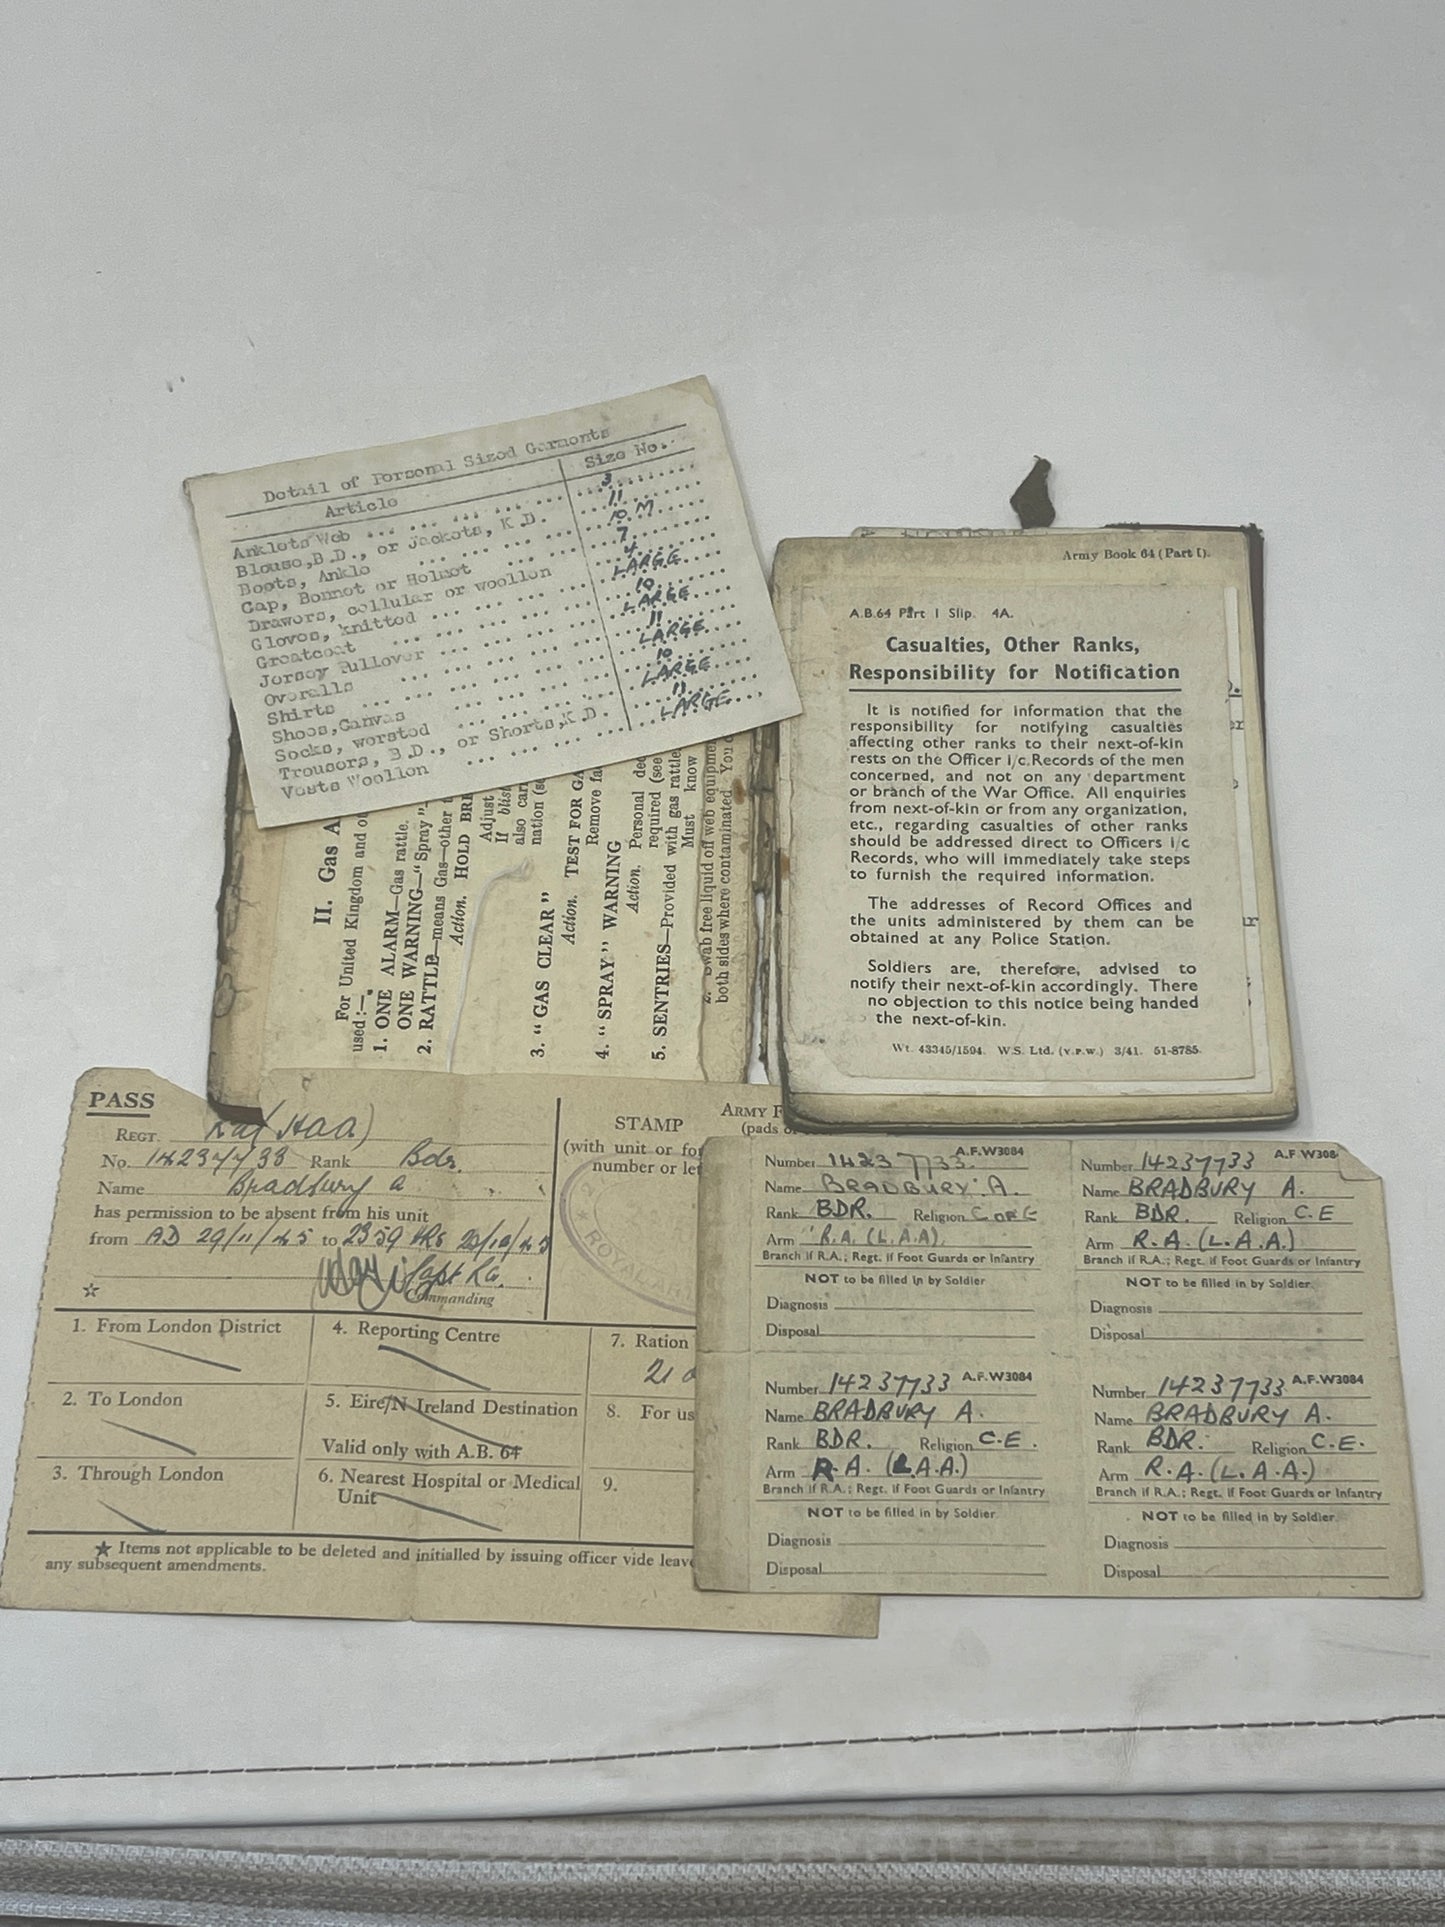 WW2 Military Service Book & Papers relating to A Bradbury